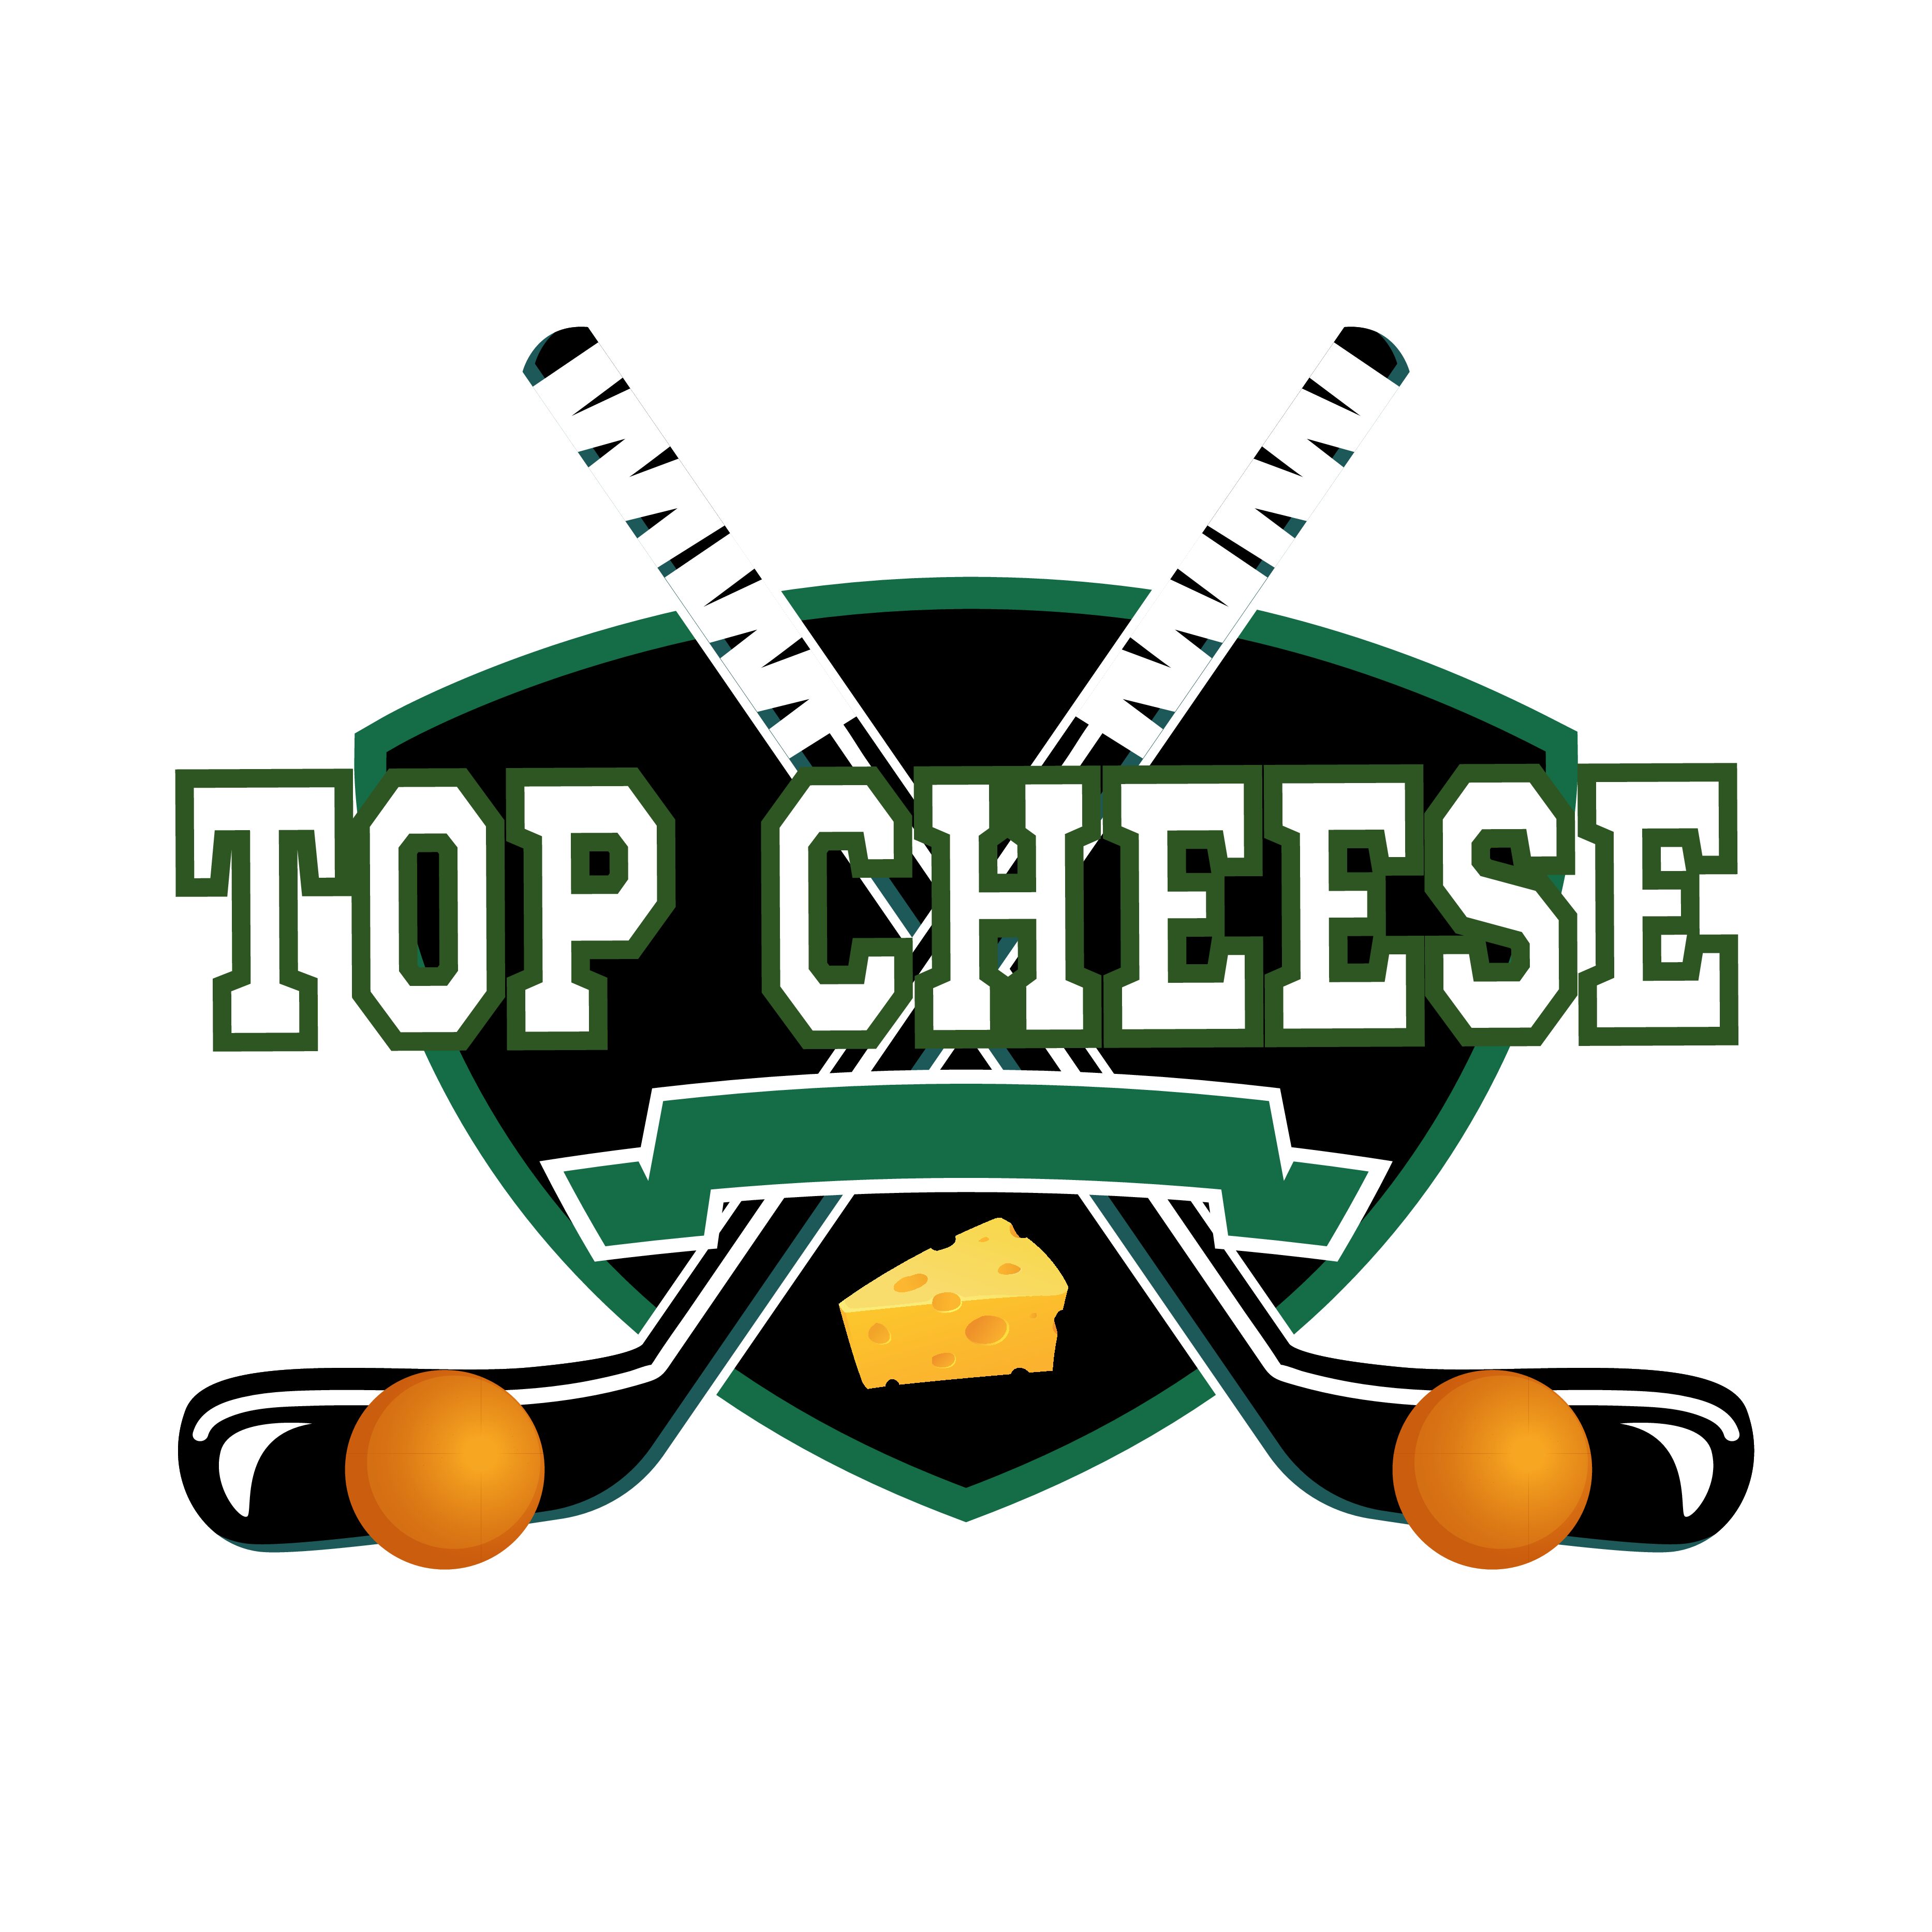 Top Cheese 2 (1)